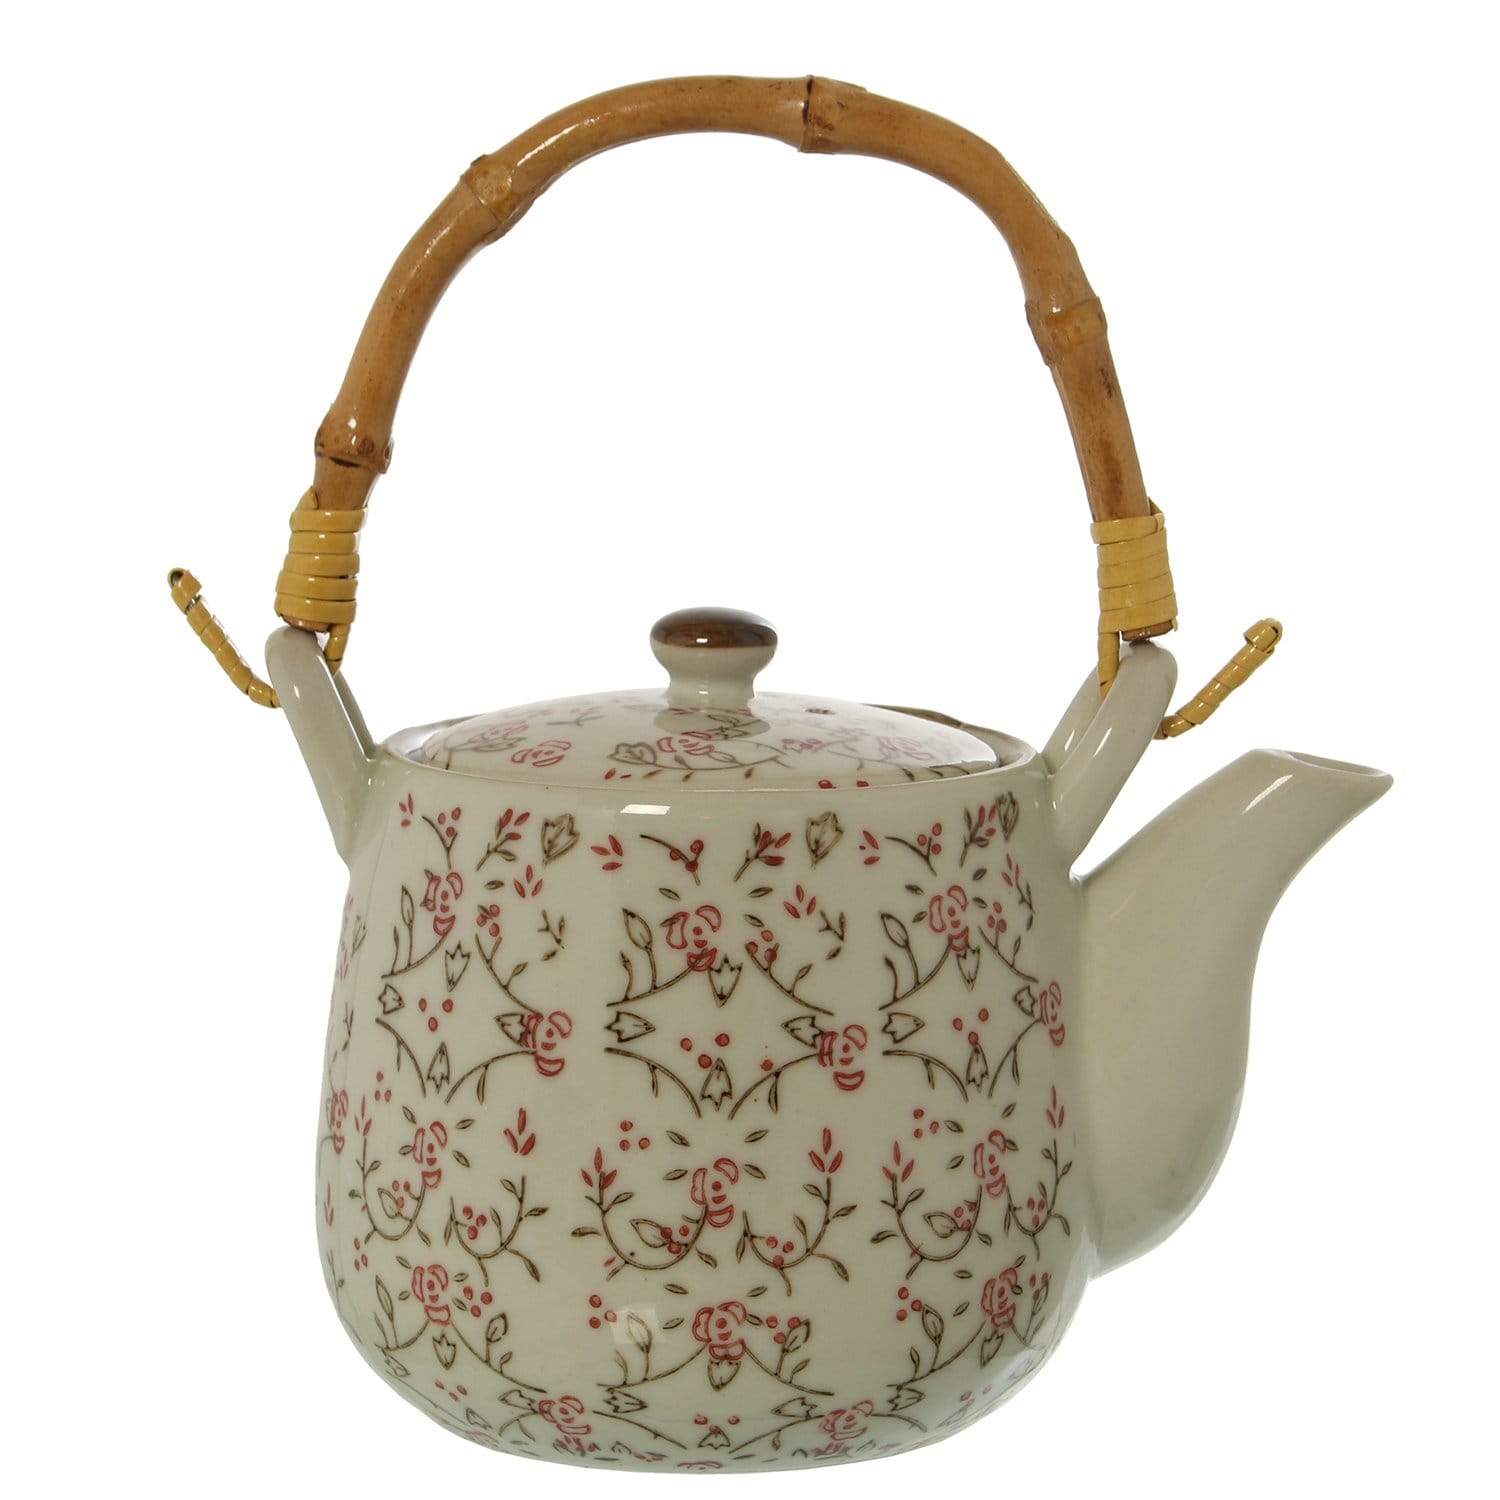 Teiera in porcellana inglese decorazione floreale country shabby chic -  Dolci pensieri gift